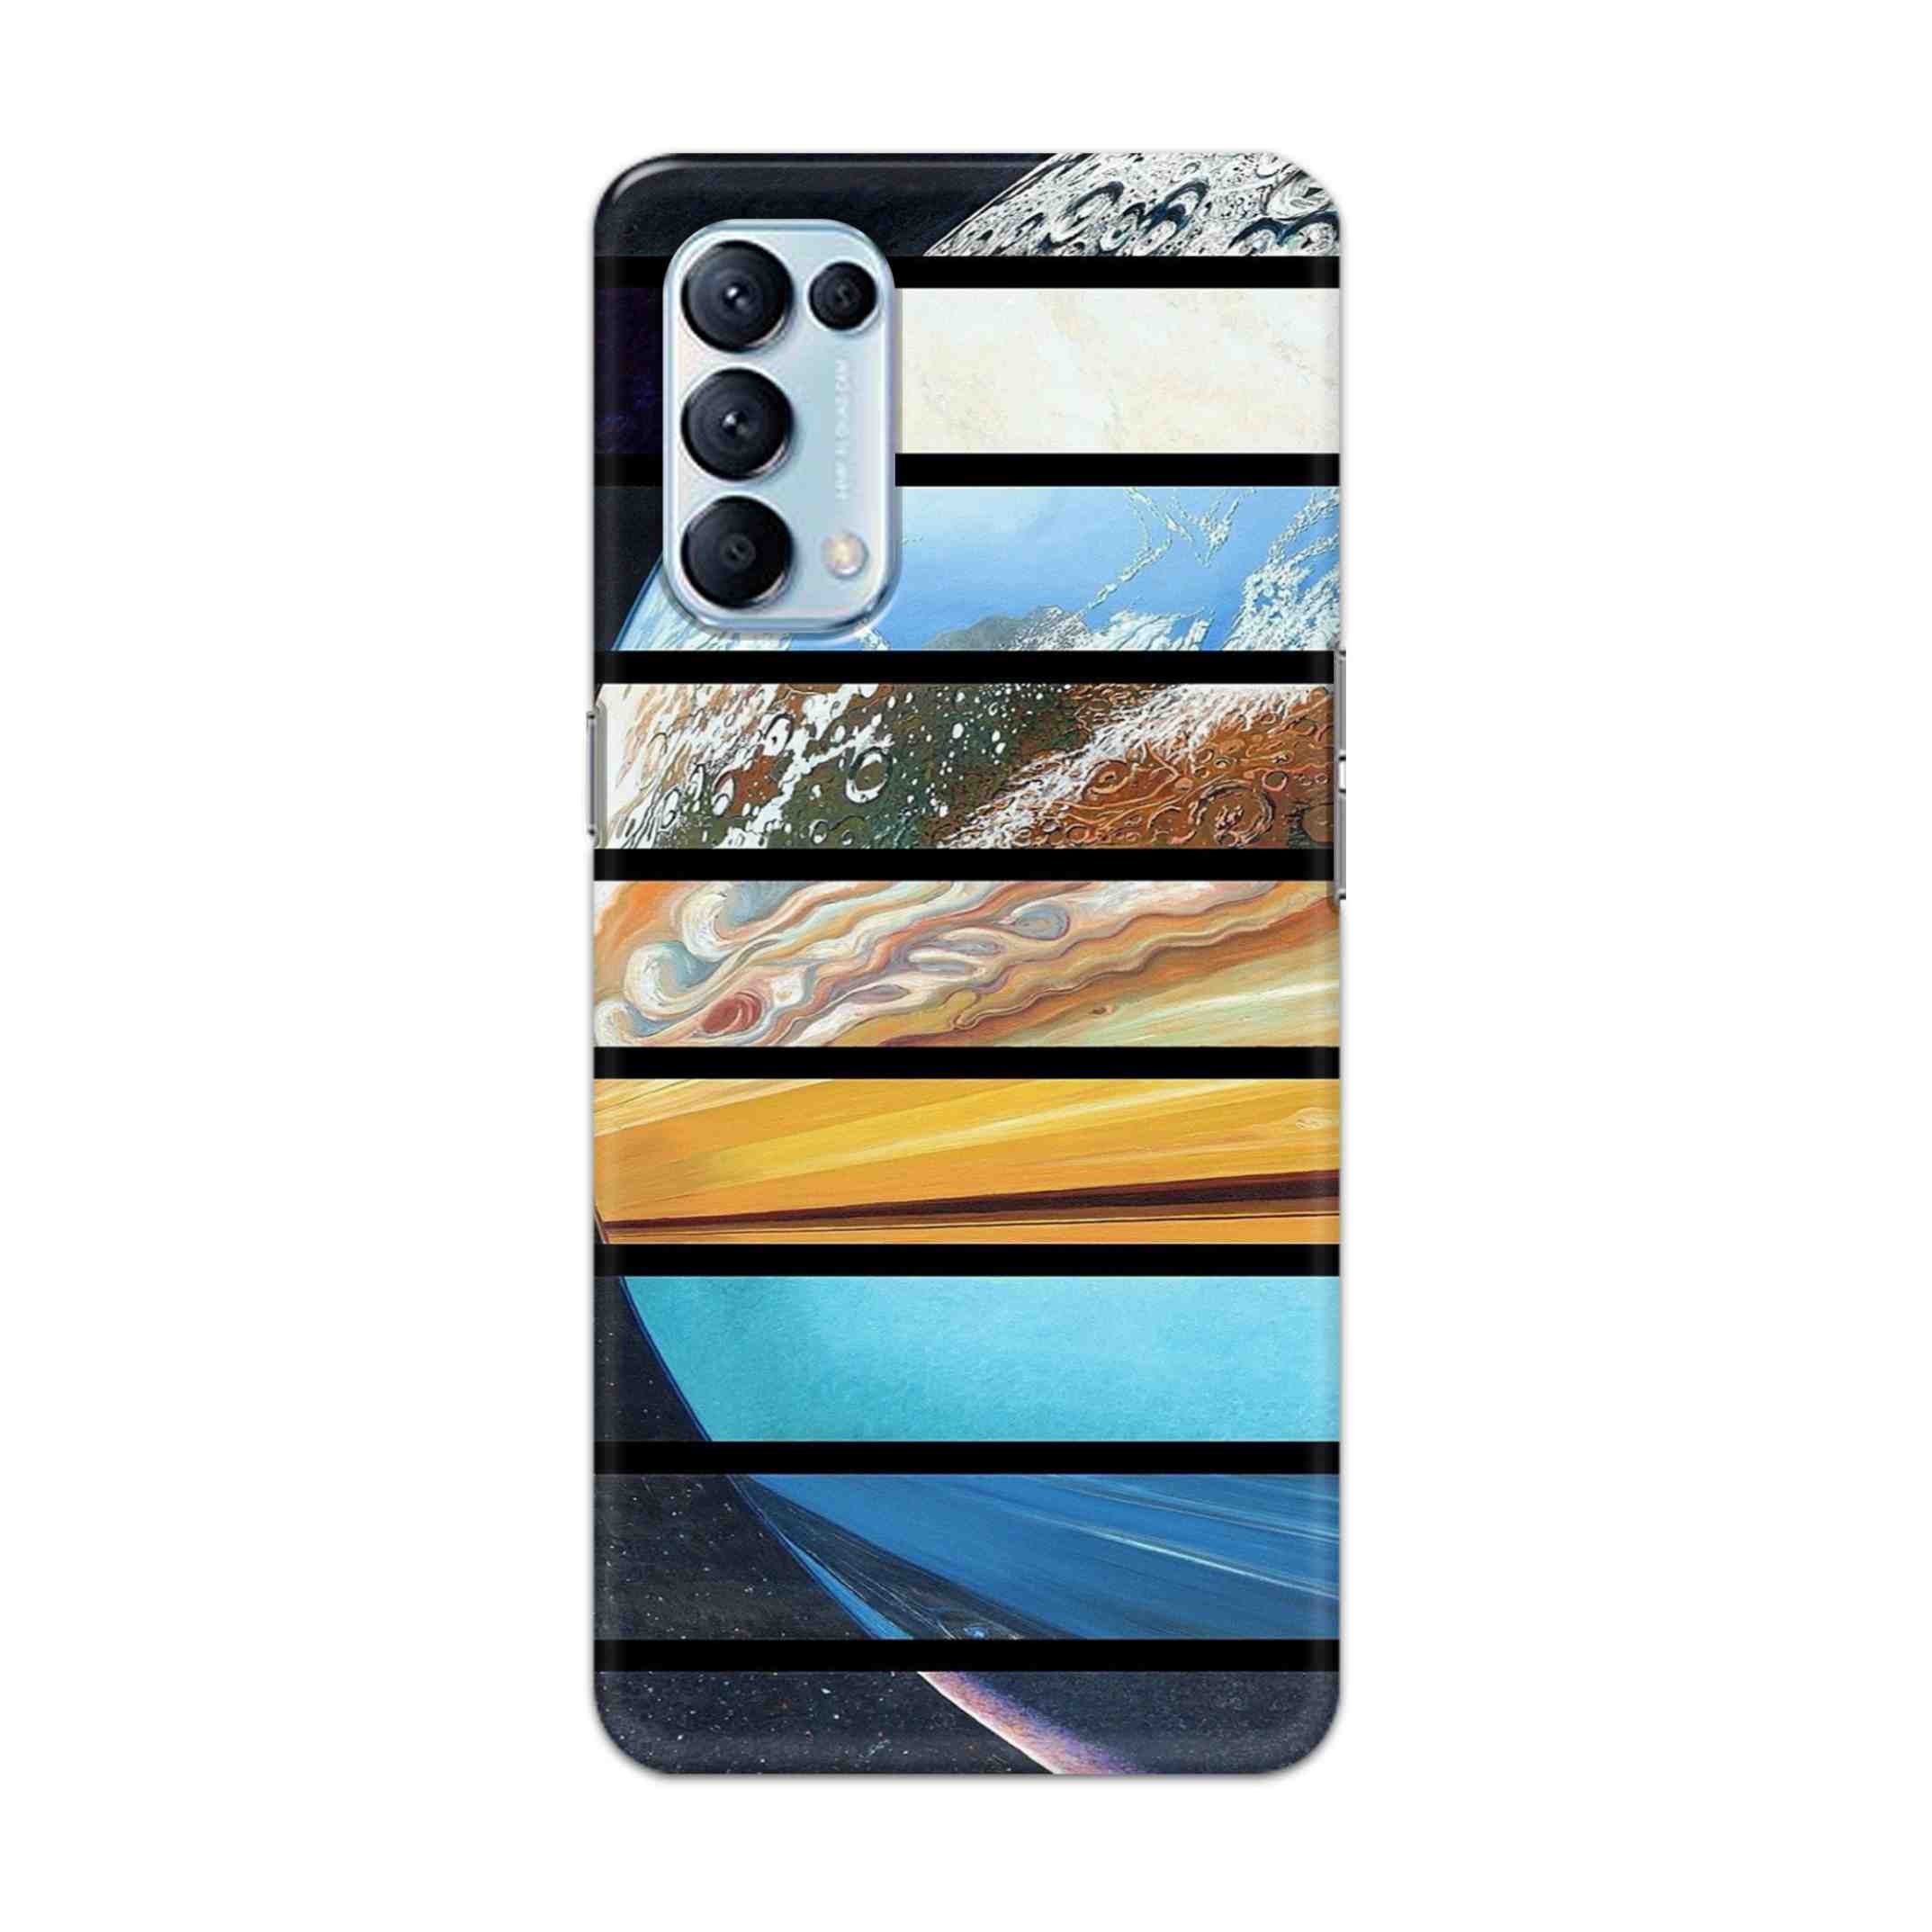 Buy Colourful Earth Hard Back Mobile Phone Case Cover For Oppo Reno 5 Pro 5G Online